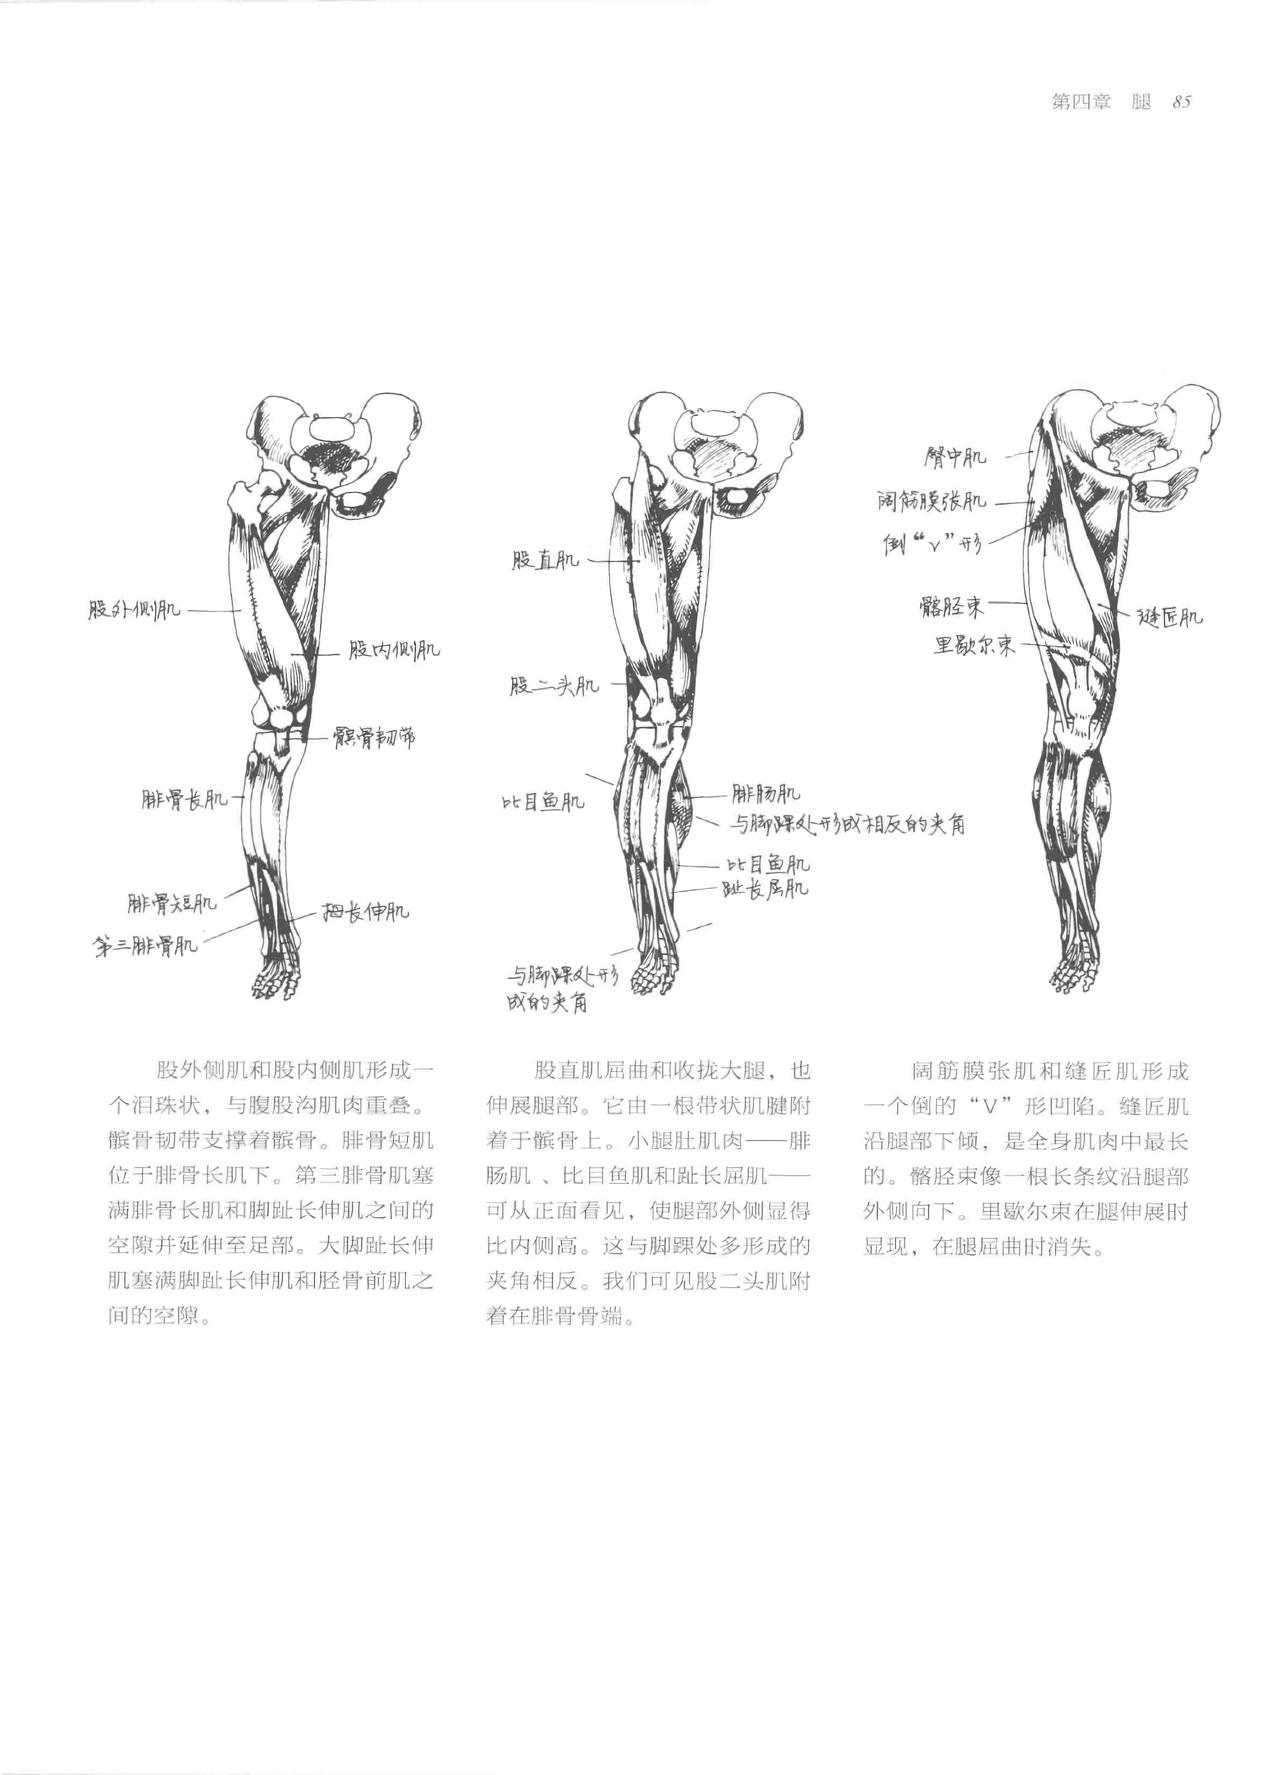 Anatomy-A Complete Guide for Artists - Joseph Sheppard [Chinese] 85